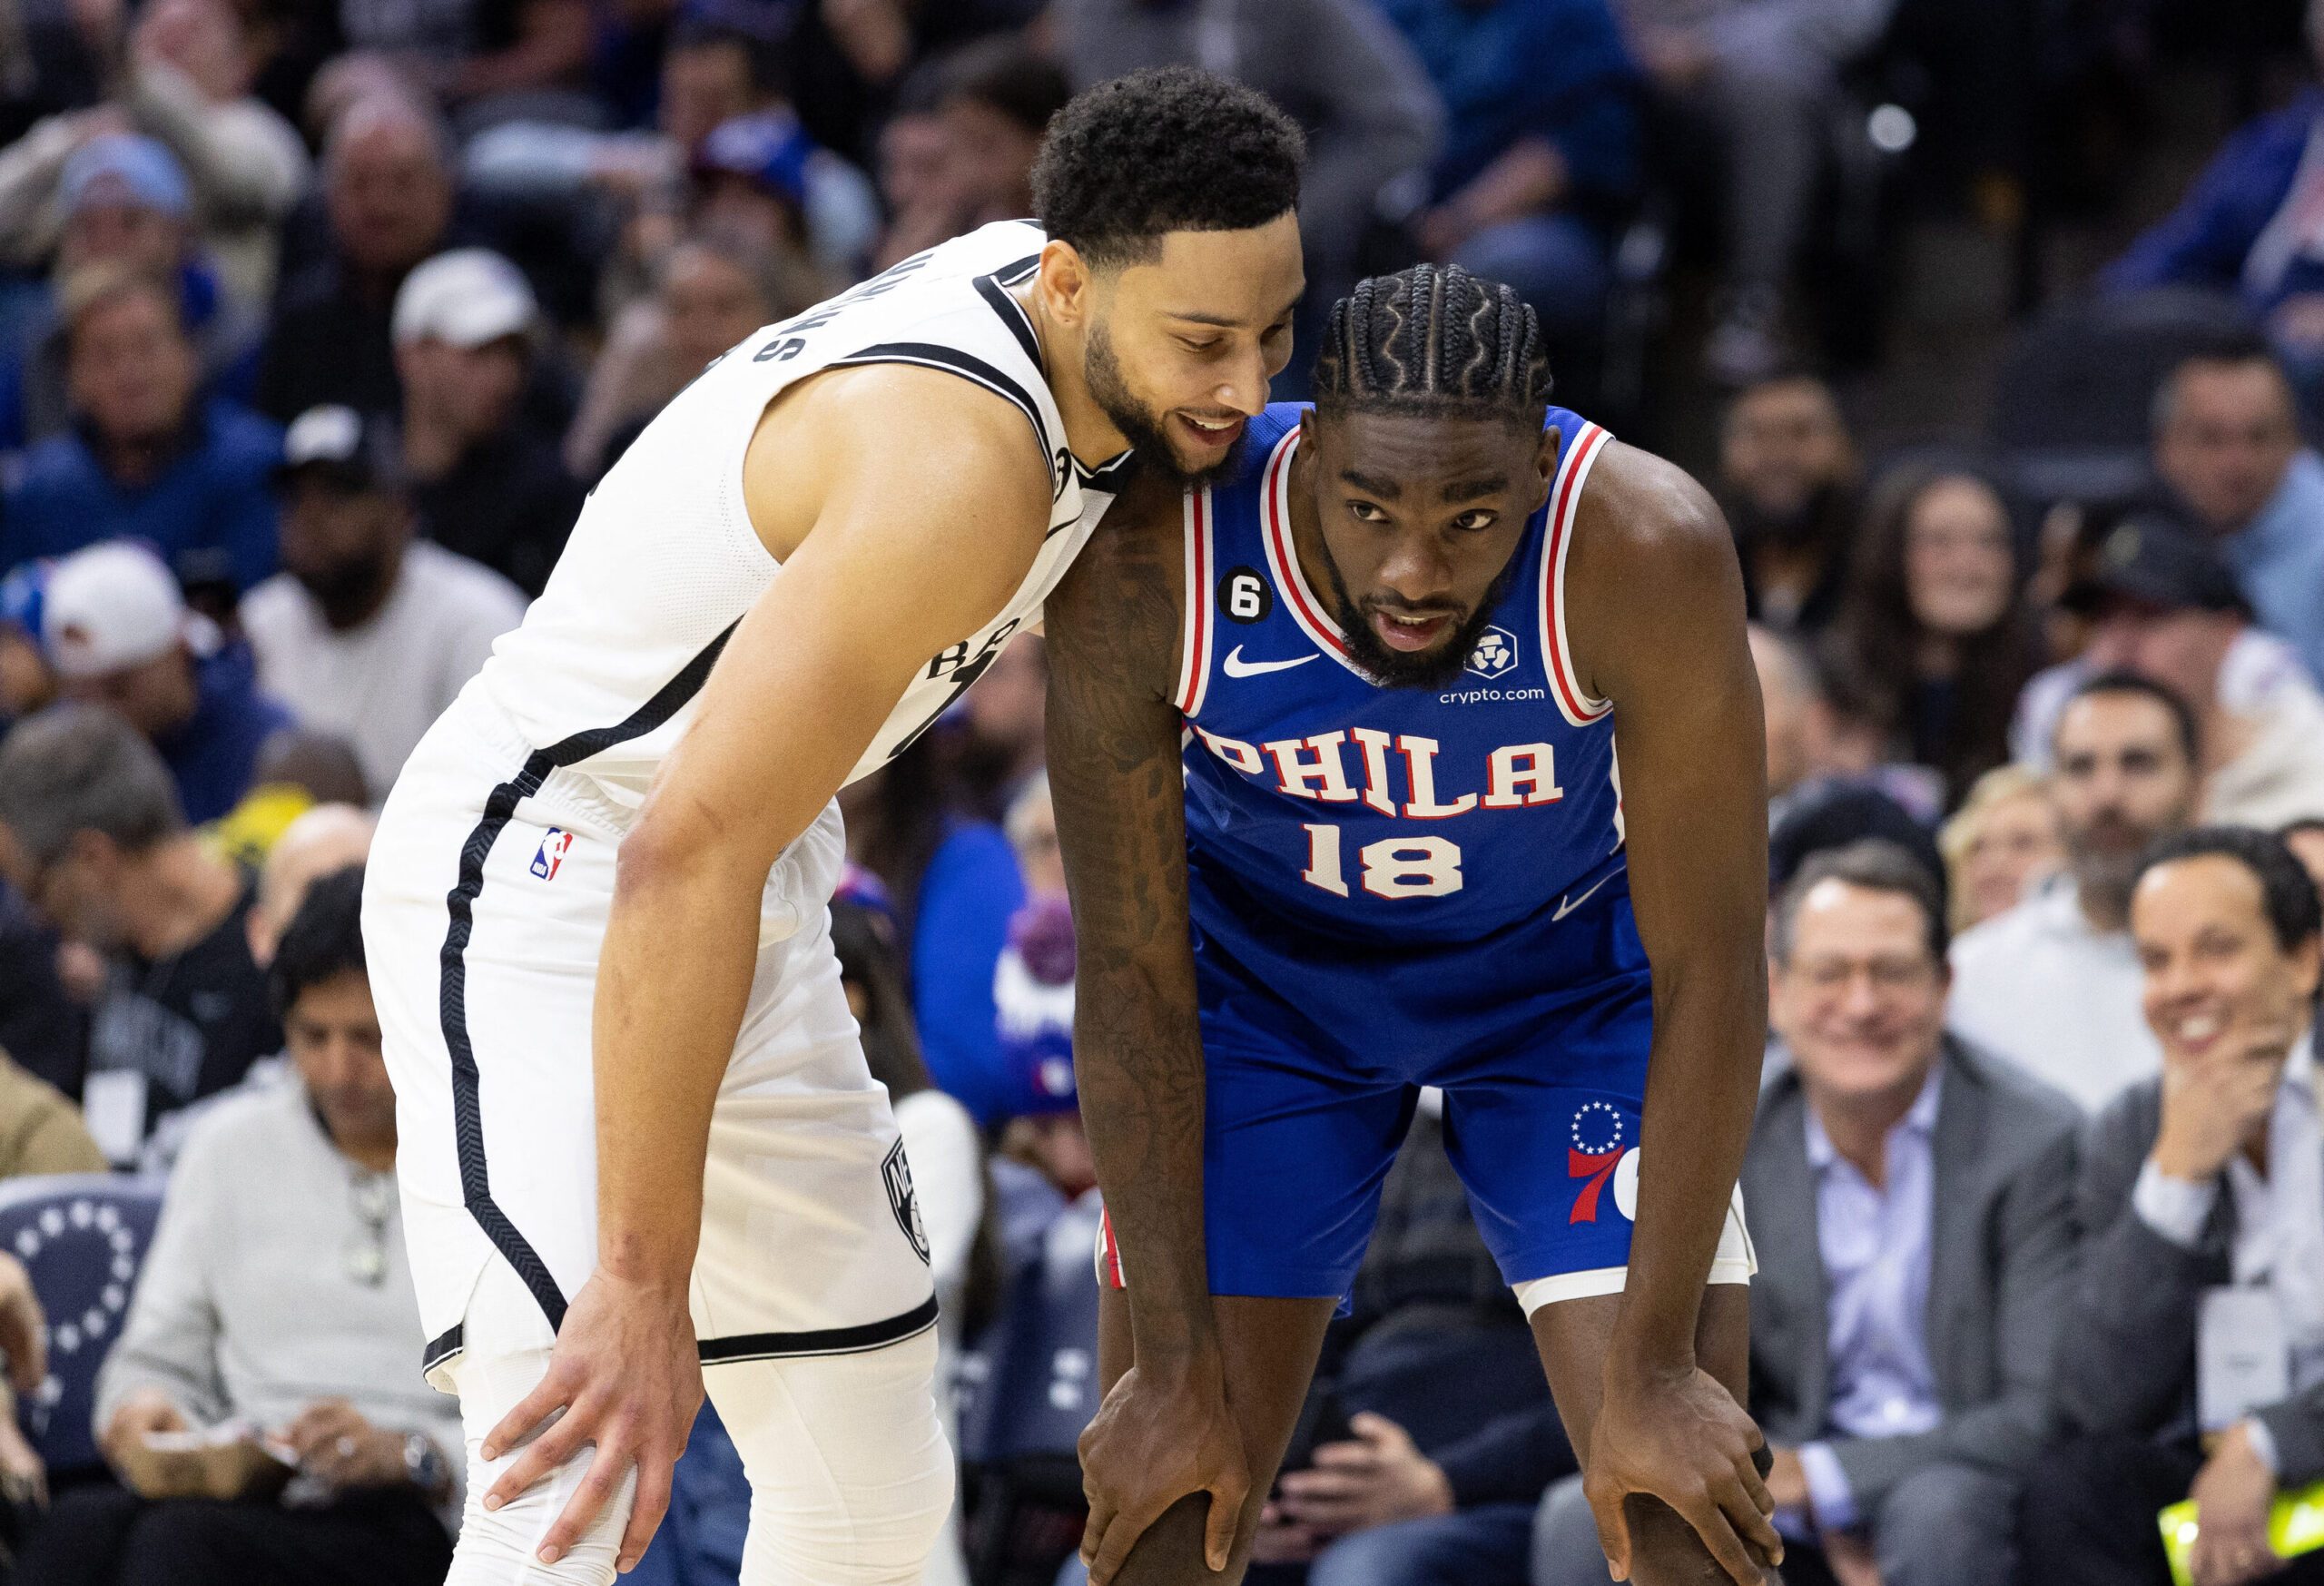 Simmons booed all night as shorthanded Sixers drub Nets